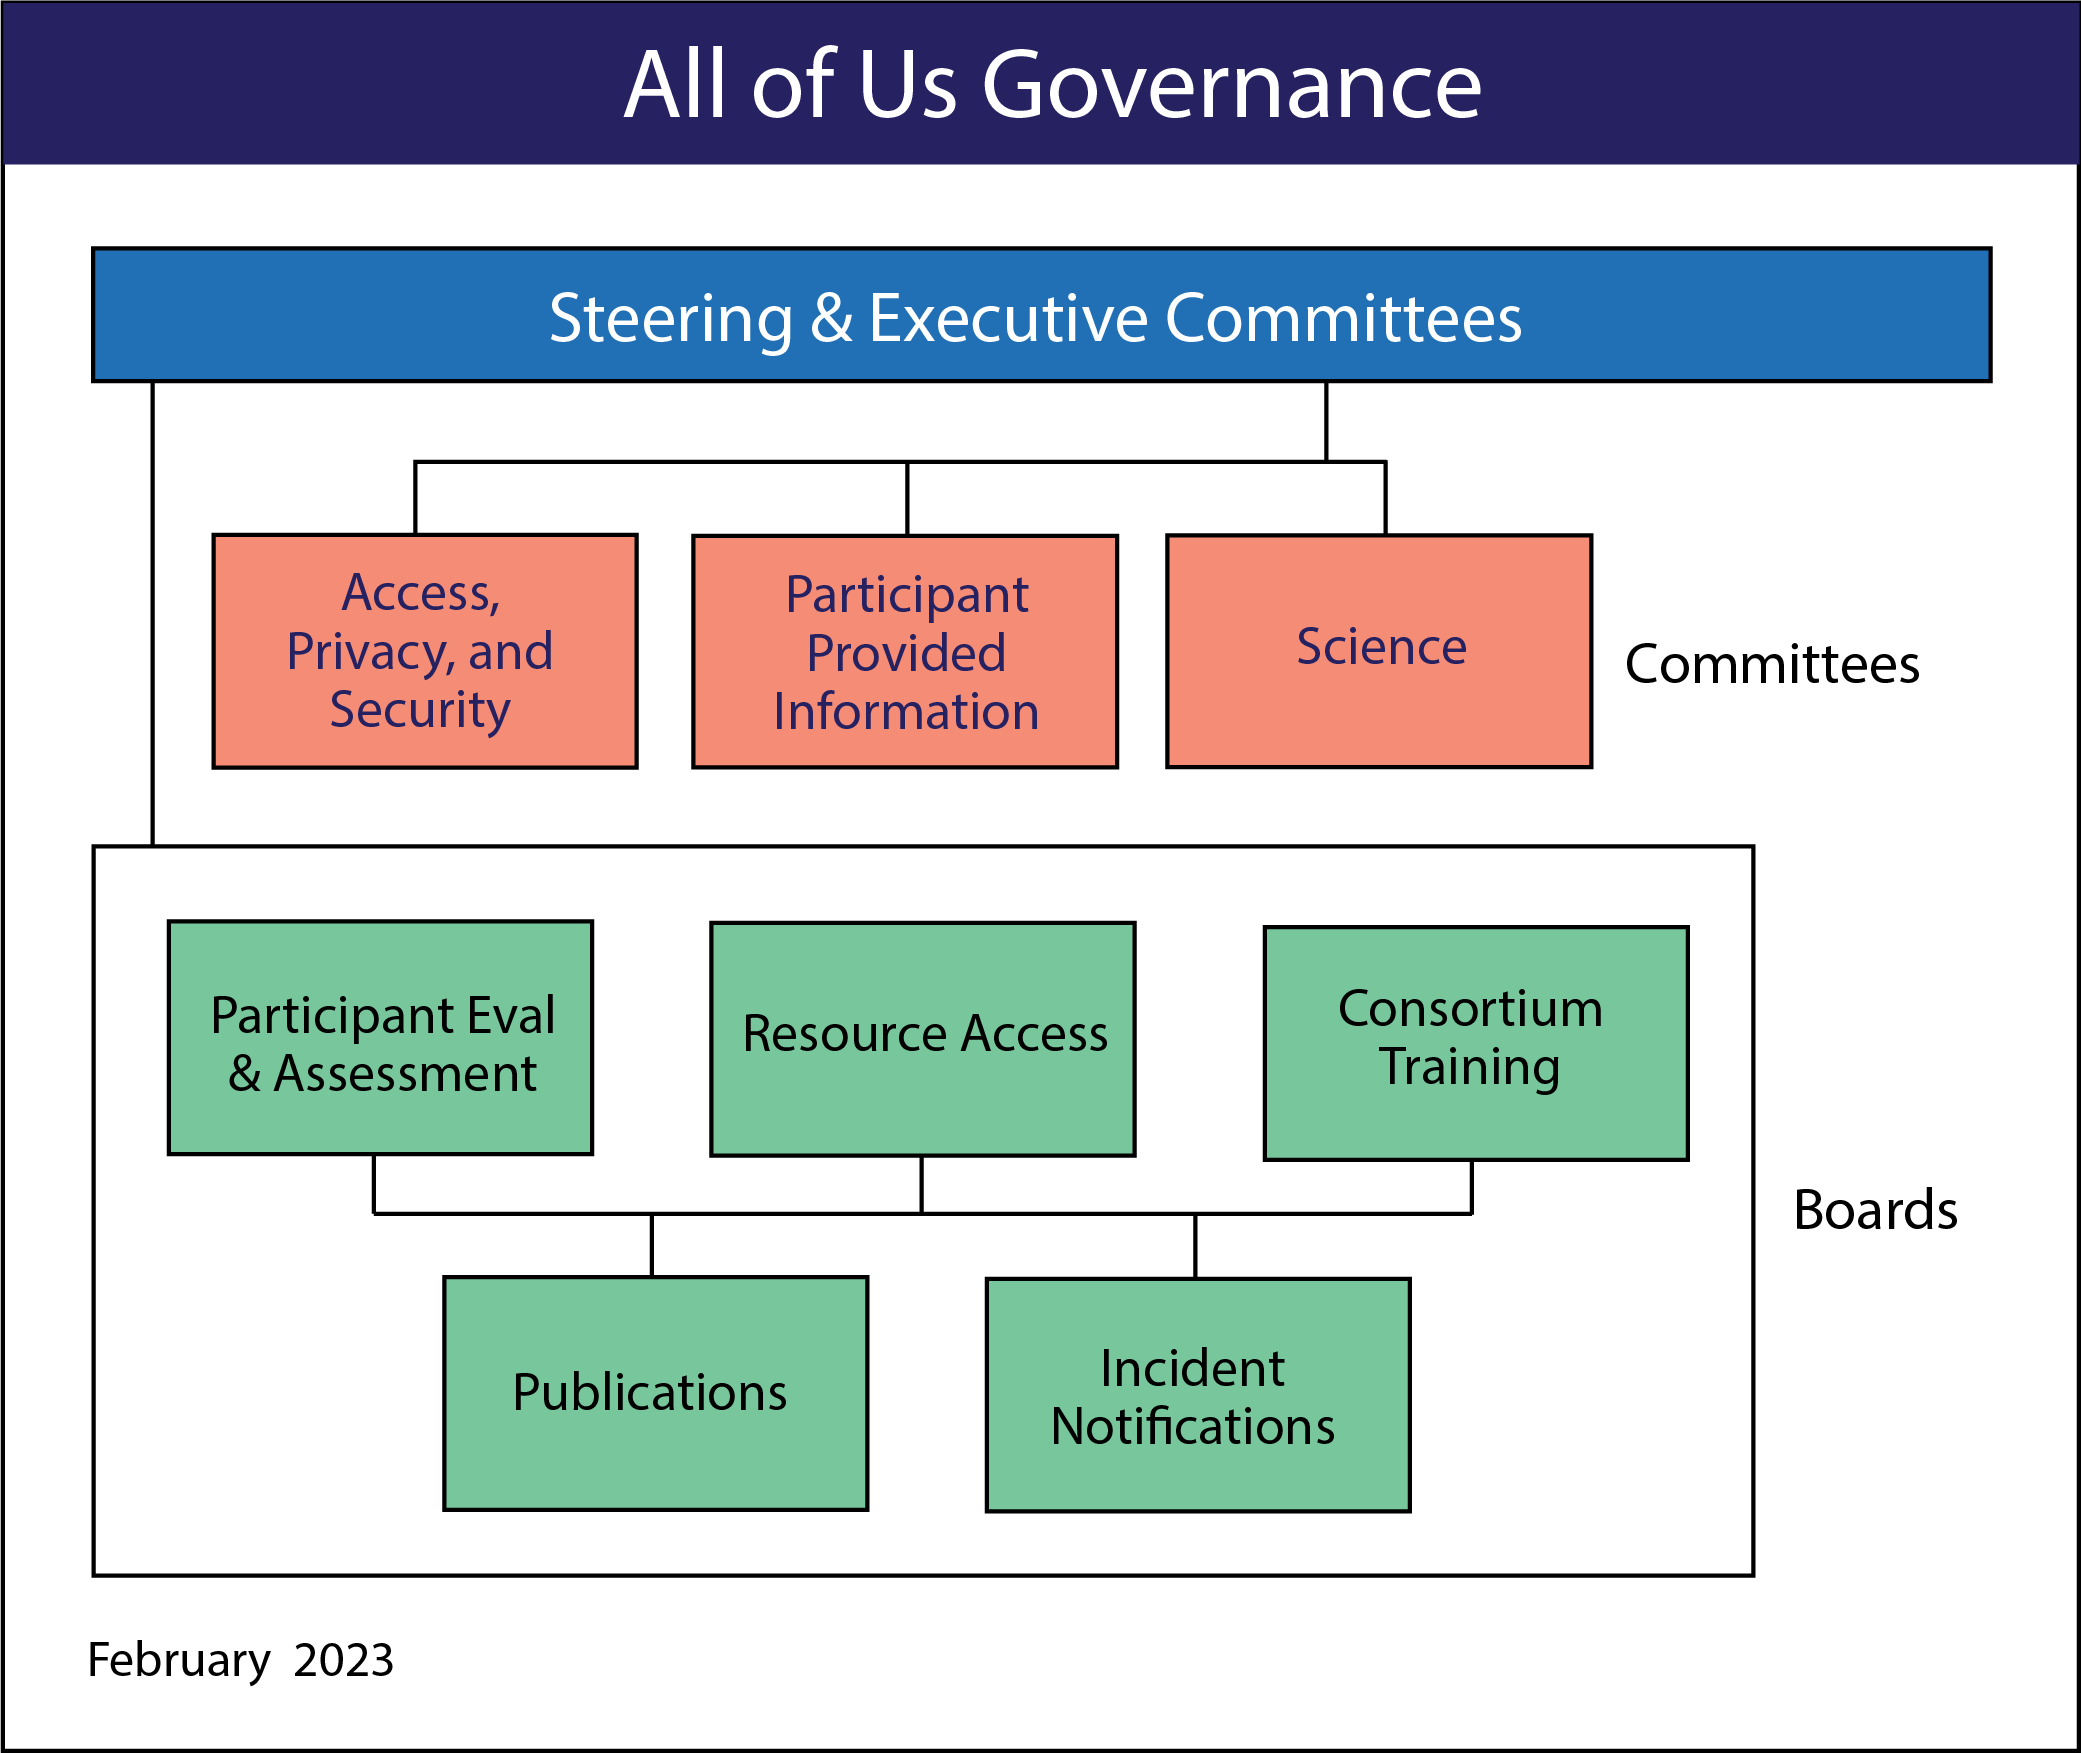 An organizational chart of the governance structure of the All of Us Research Program. All committees and board report to the Steering and Executive Committees. The org chart displays three committees on the first tier below the Steering and Executive Committees: Access, Privacy, and Security; Participant Provided Information; and Science. On the next tier down are five boards: Participant Evaluation and Assessment, Resource Access, Consortium Training, Publications, and Incident Notifications.